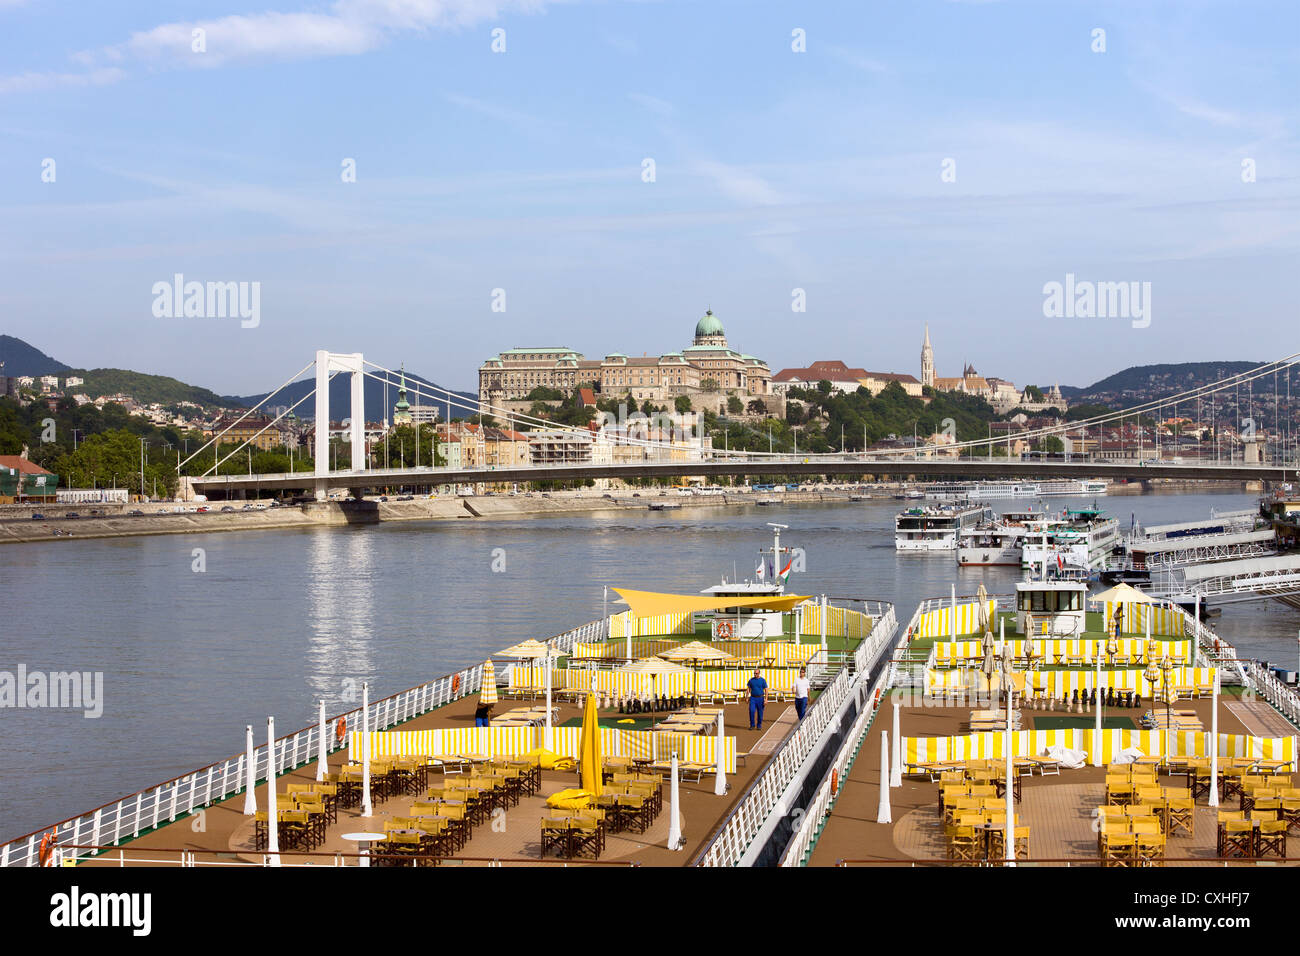 Passenger boats with restaurant on deck, docked on the Danube river in Budapest, Hungary. Stock Photo